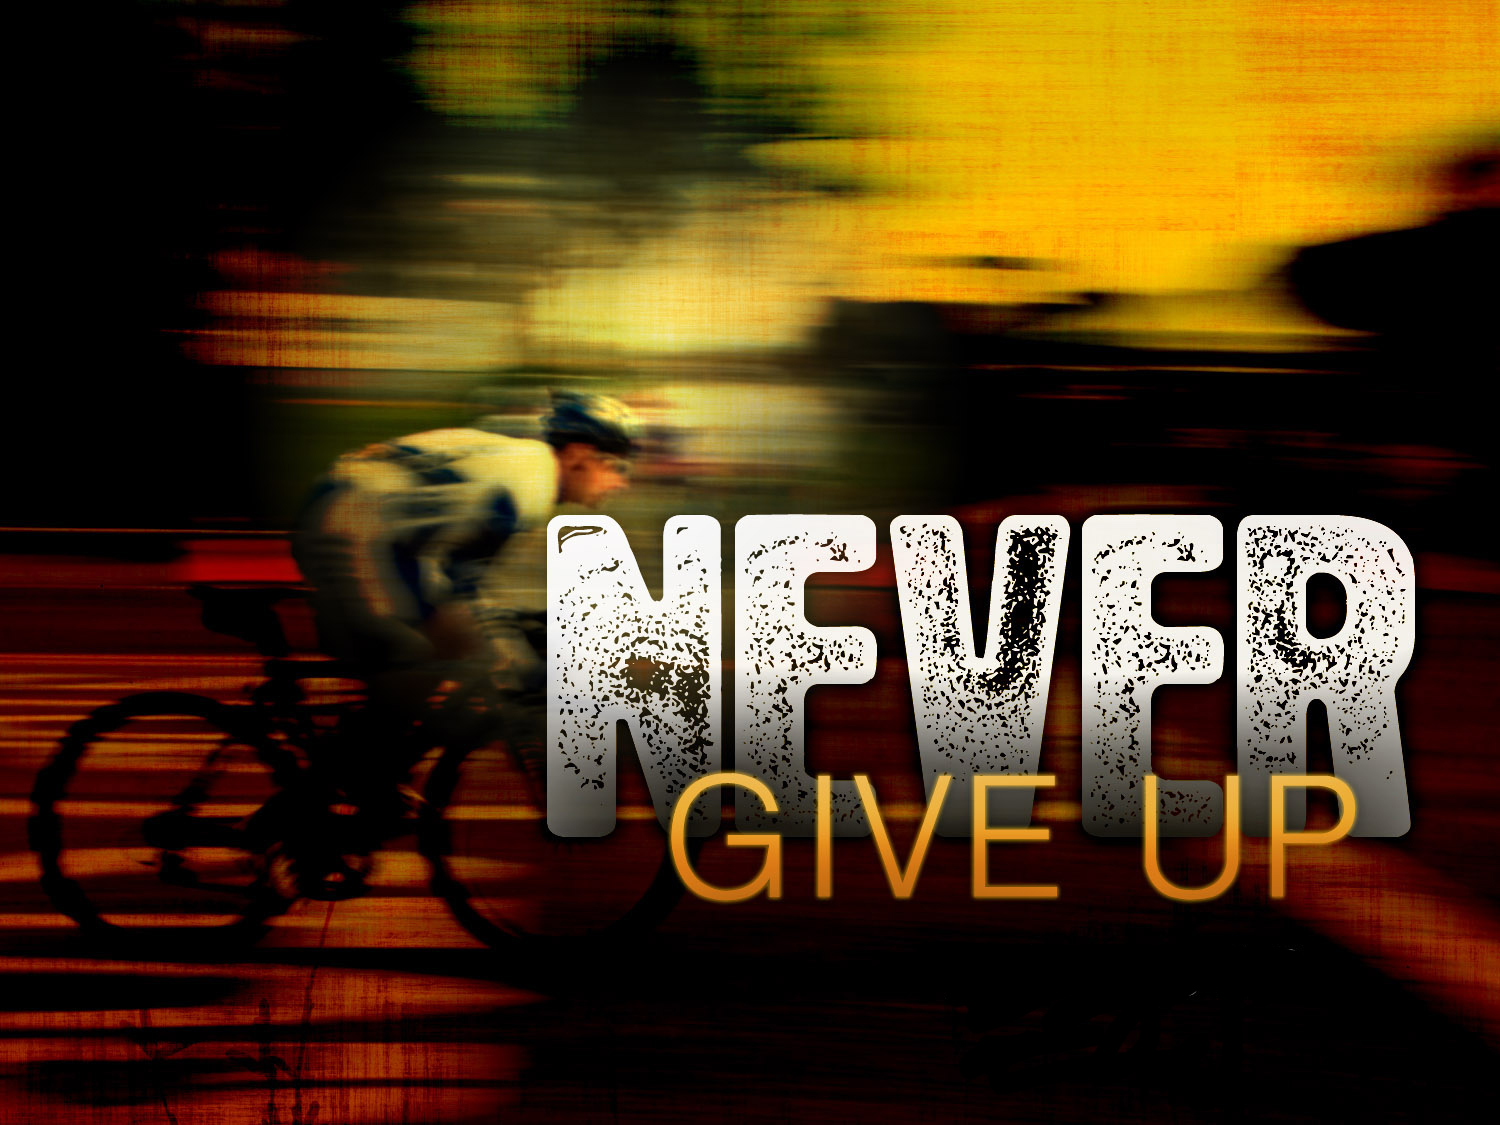 never give up wallpaper,font,text,games,graphics